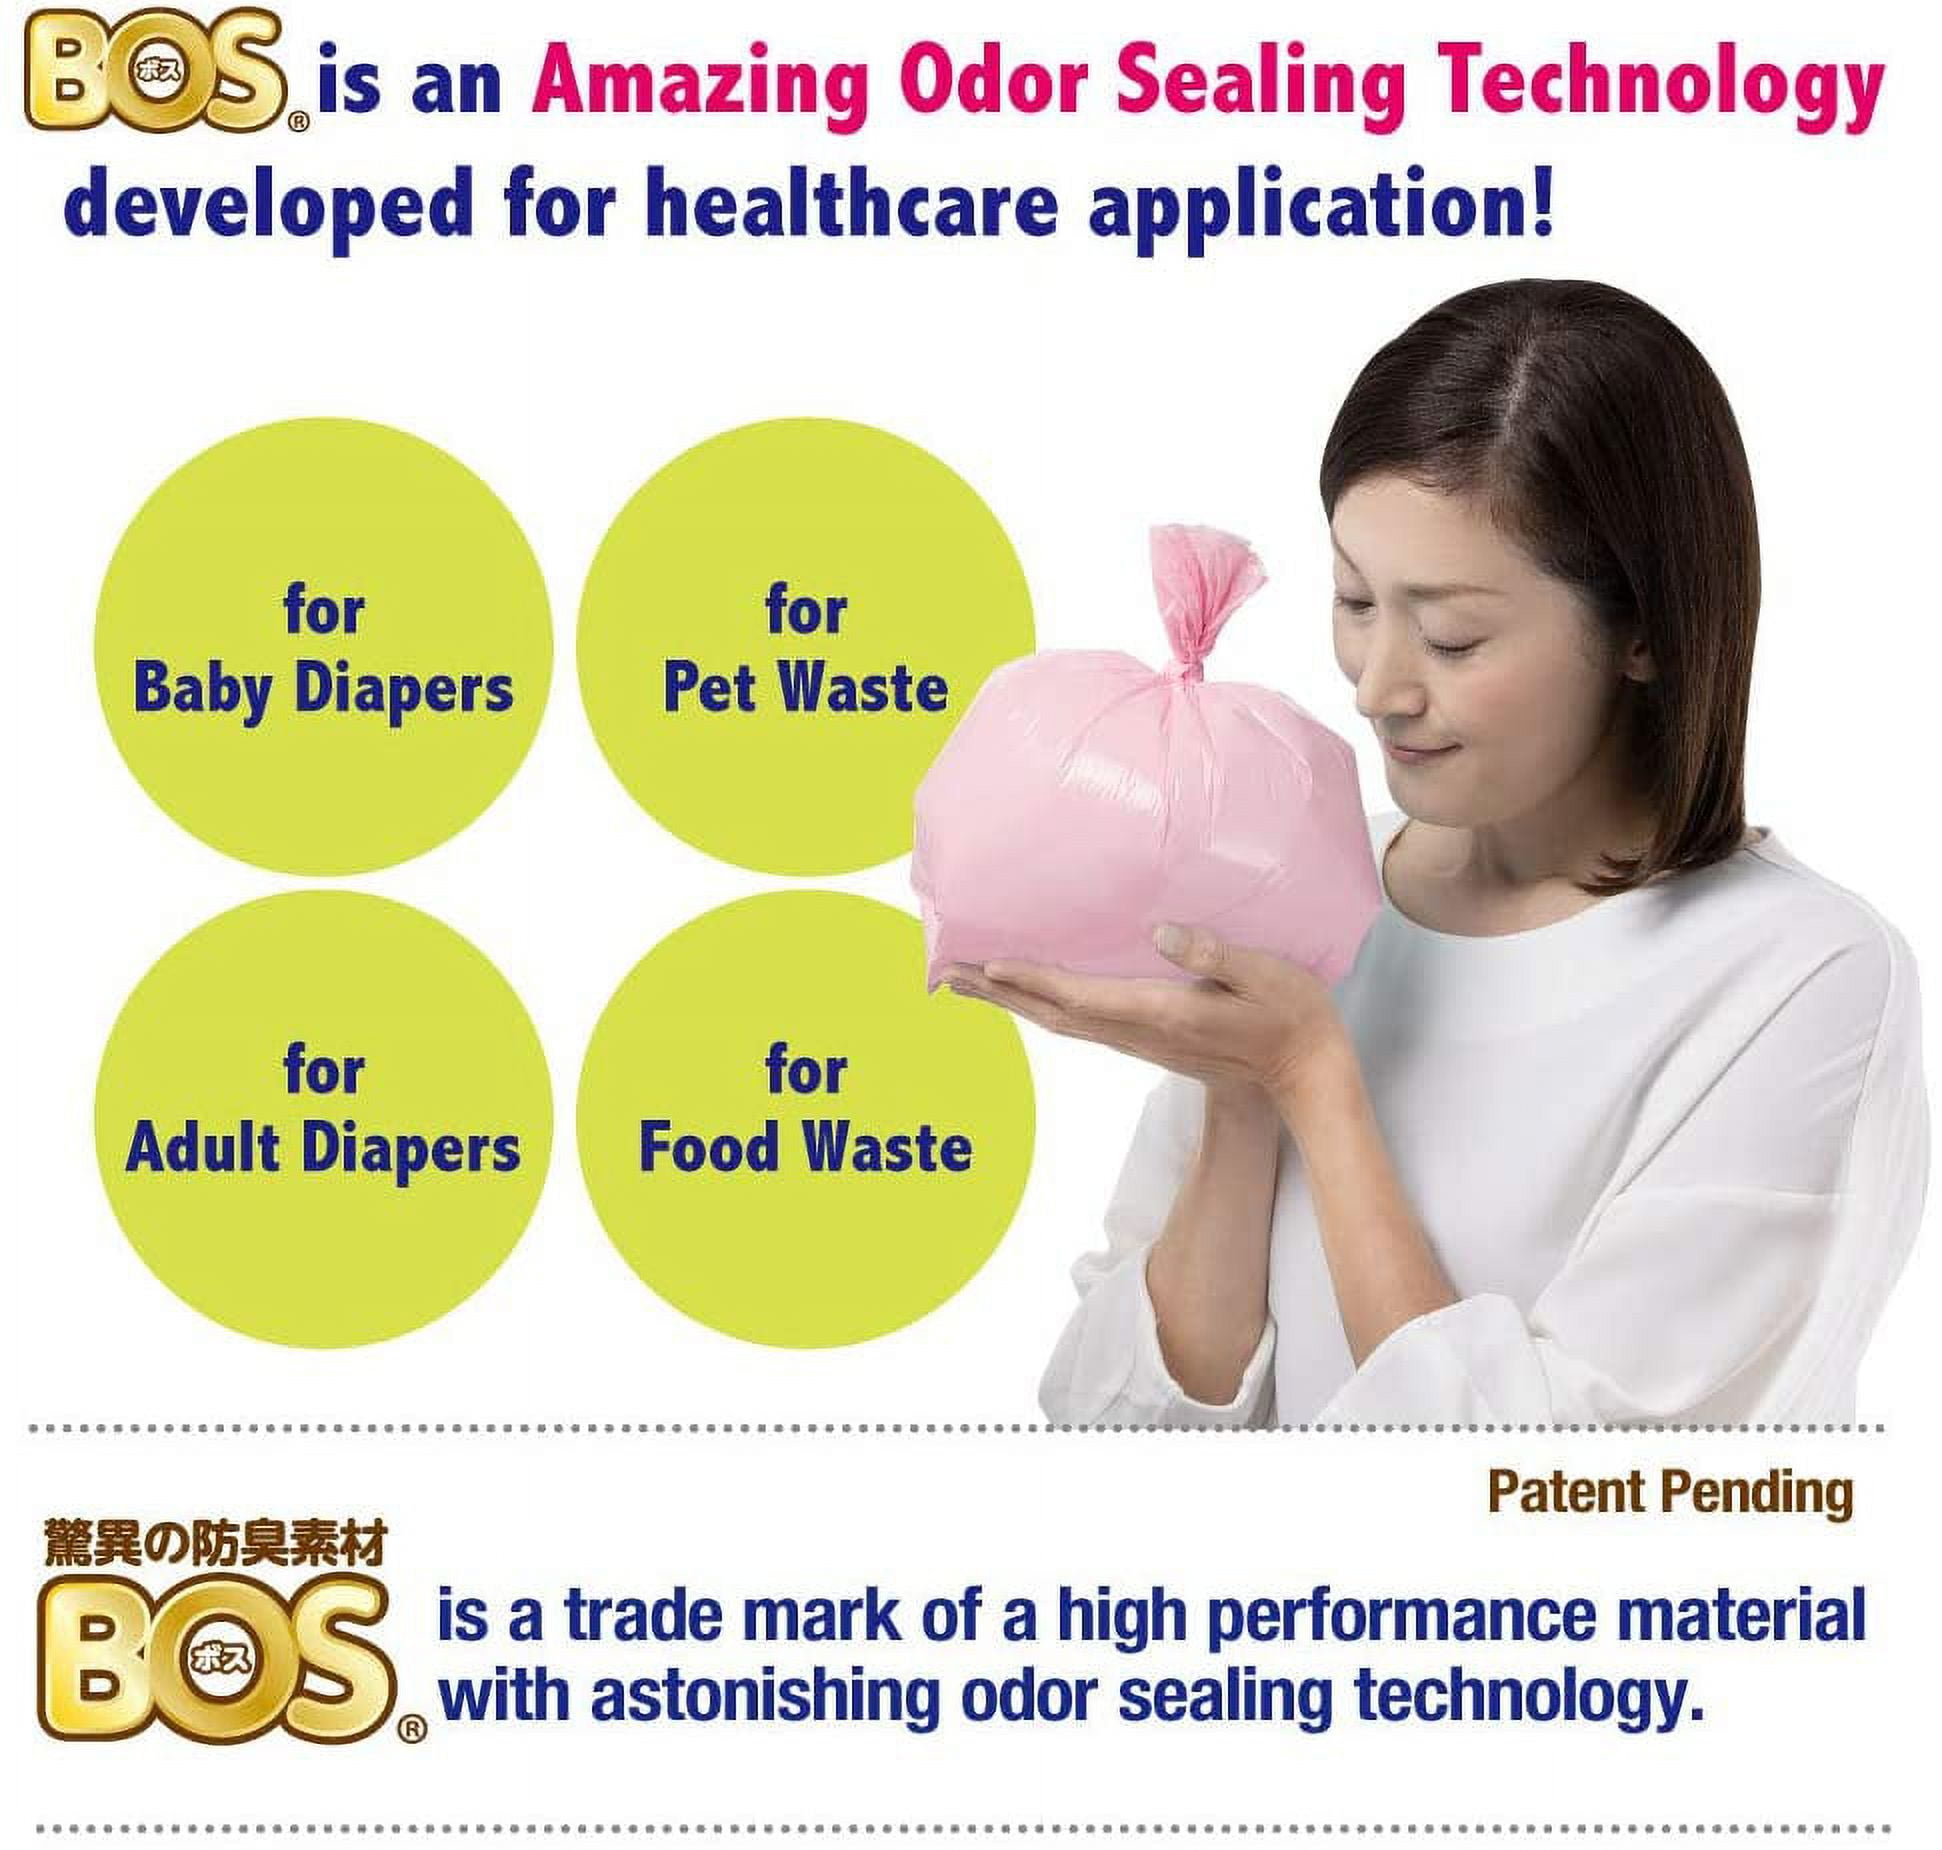  BOS Amazing Odor Sealing Disposable Bags for Diapers, Cat  litter or any Sanitary Product Disposal- Durable and Unscented [Size: XL,  Color: White] (50 count, Pack of 1) (50 Bags) : Baby